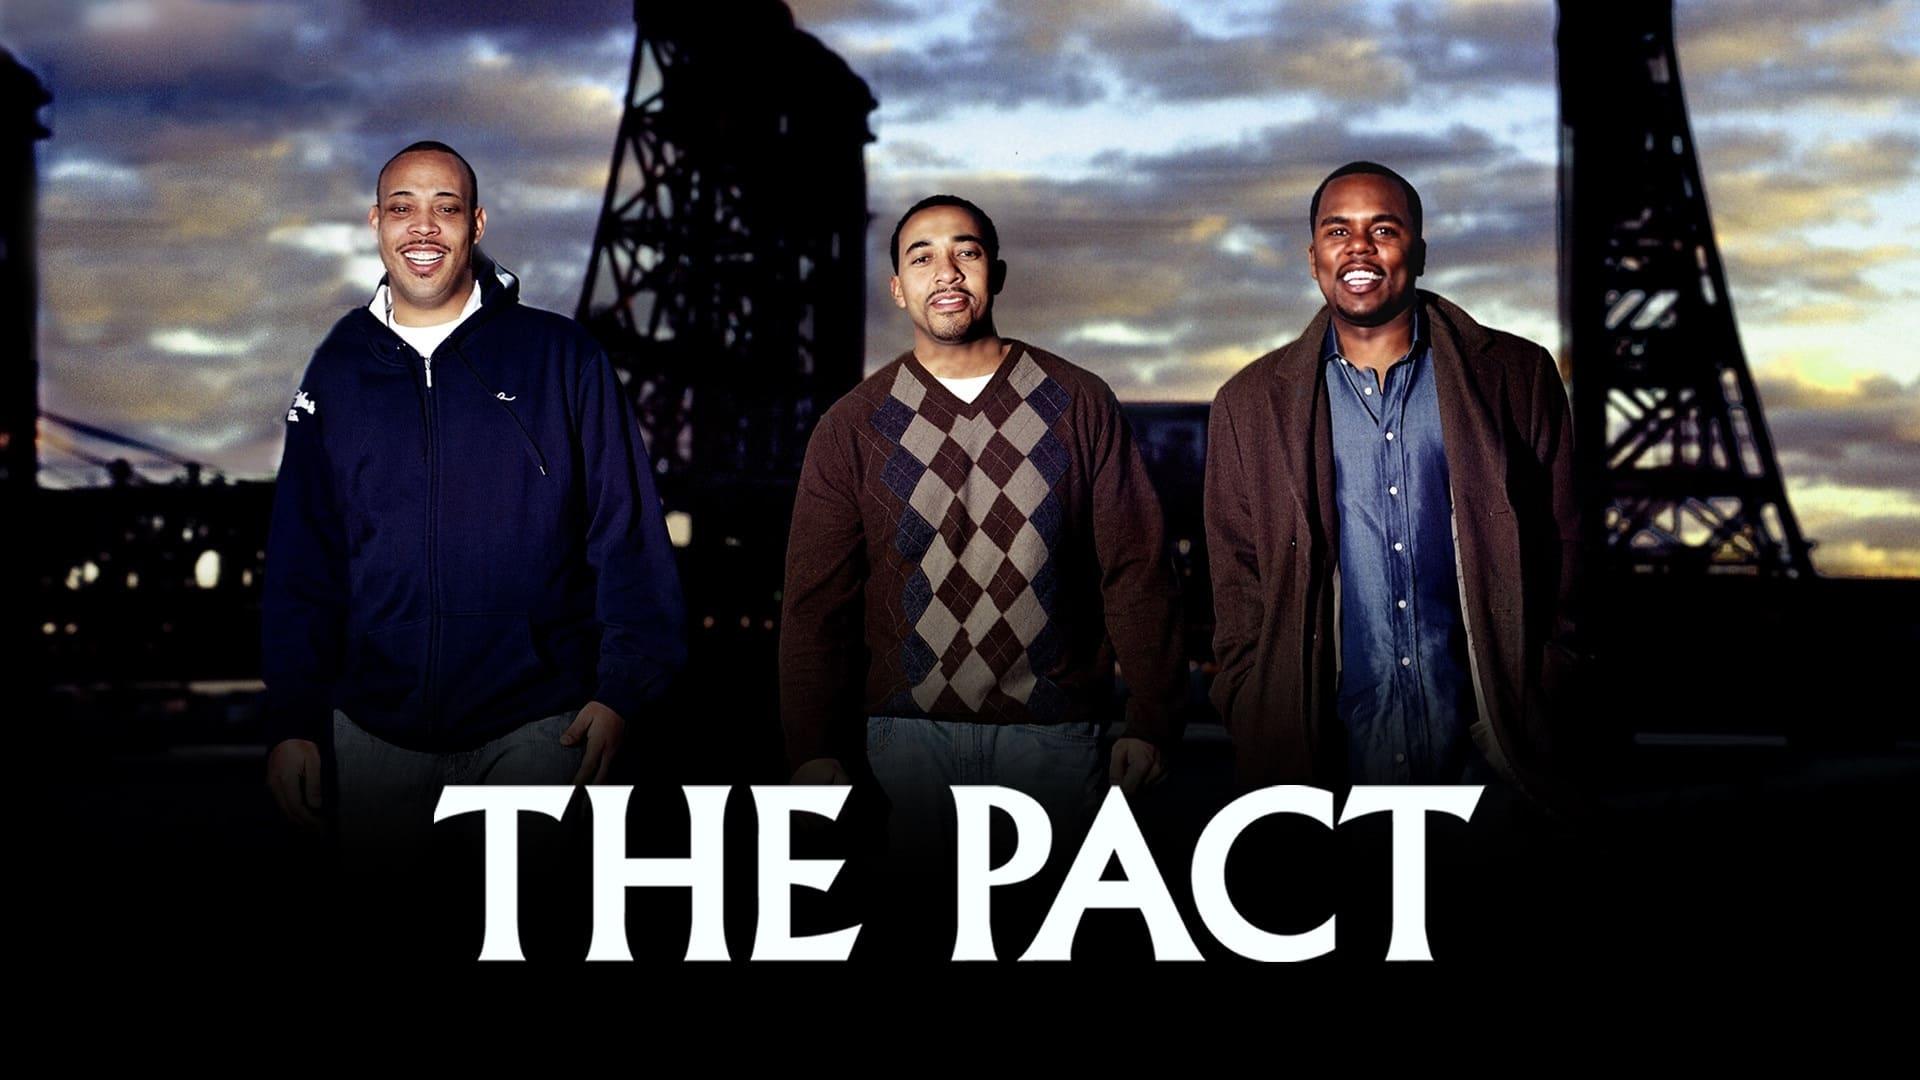 The Pact backdrop